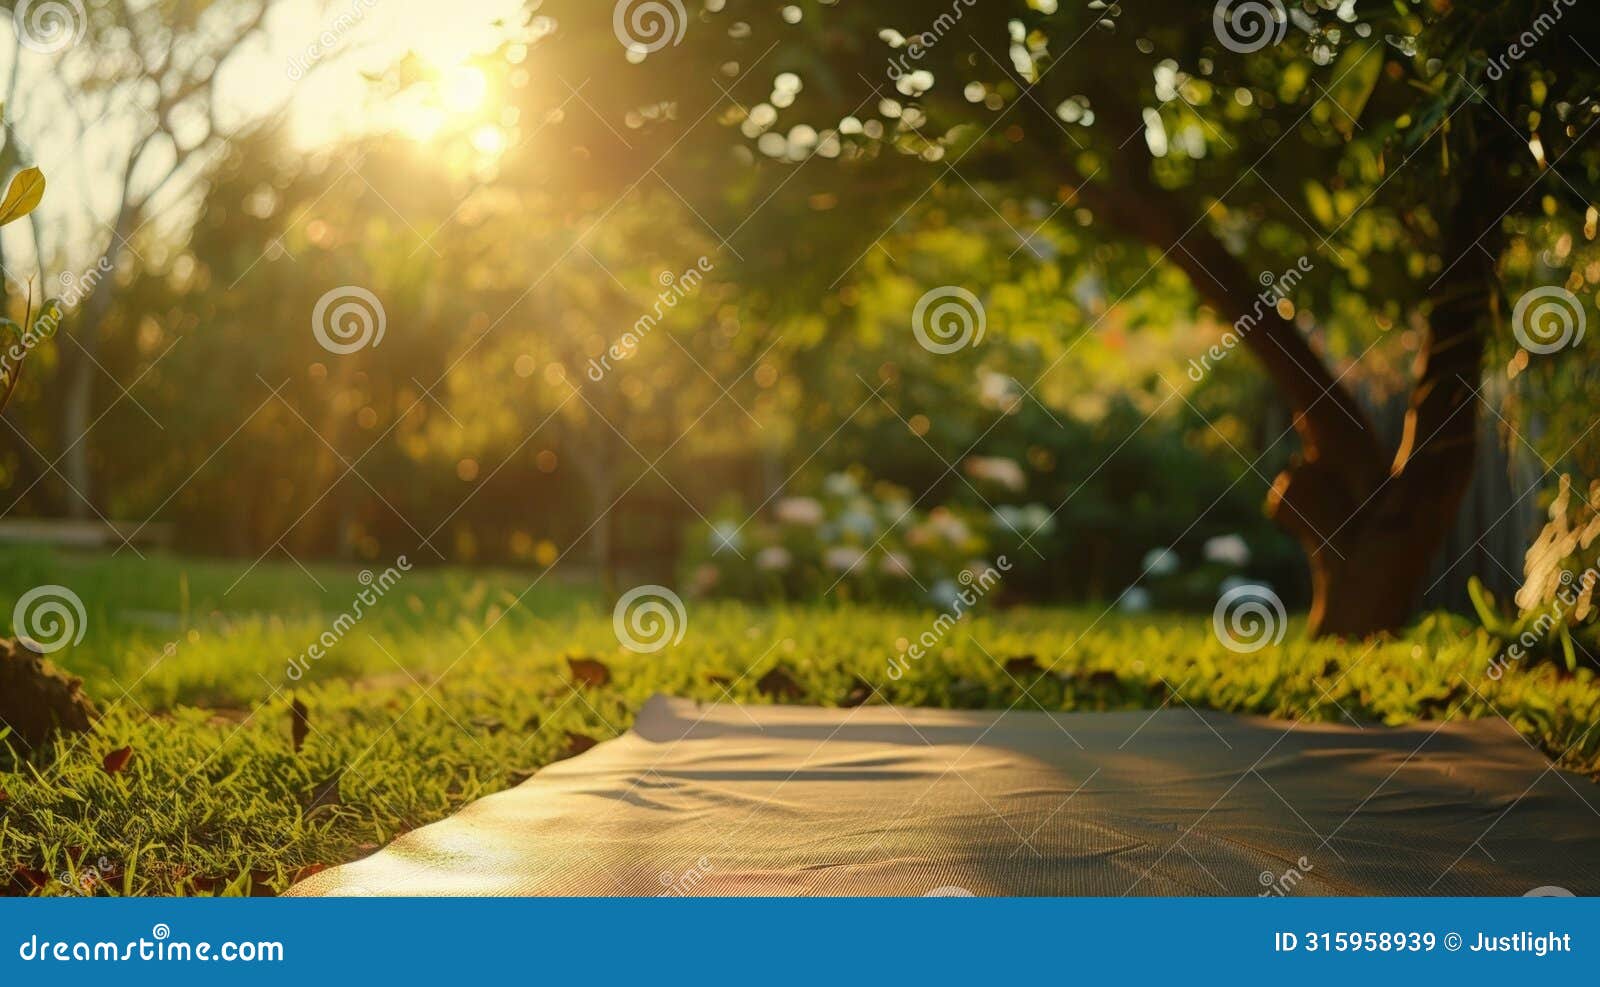 a calming outdoor yoga session in a serene garden promoting the connection between mind and body for a restful and